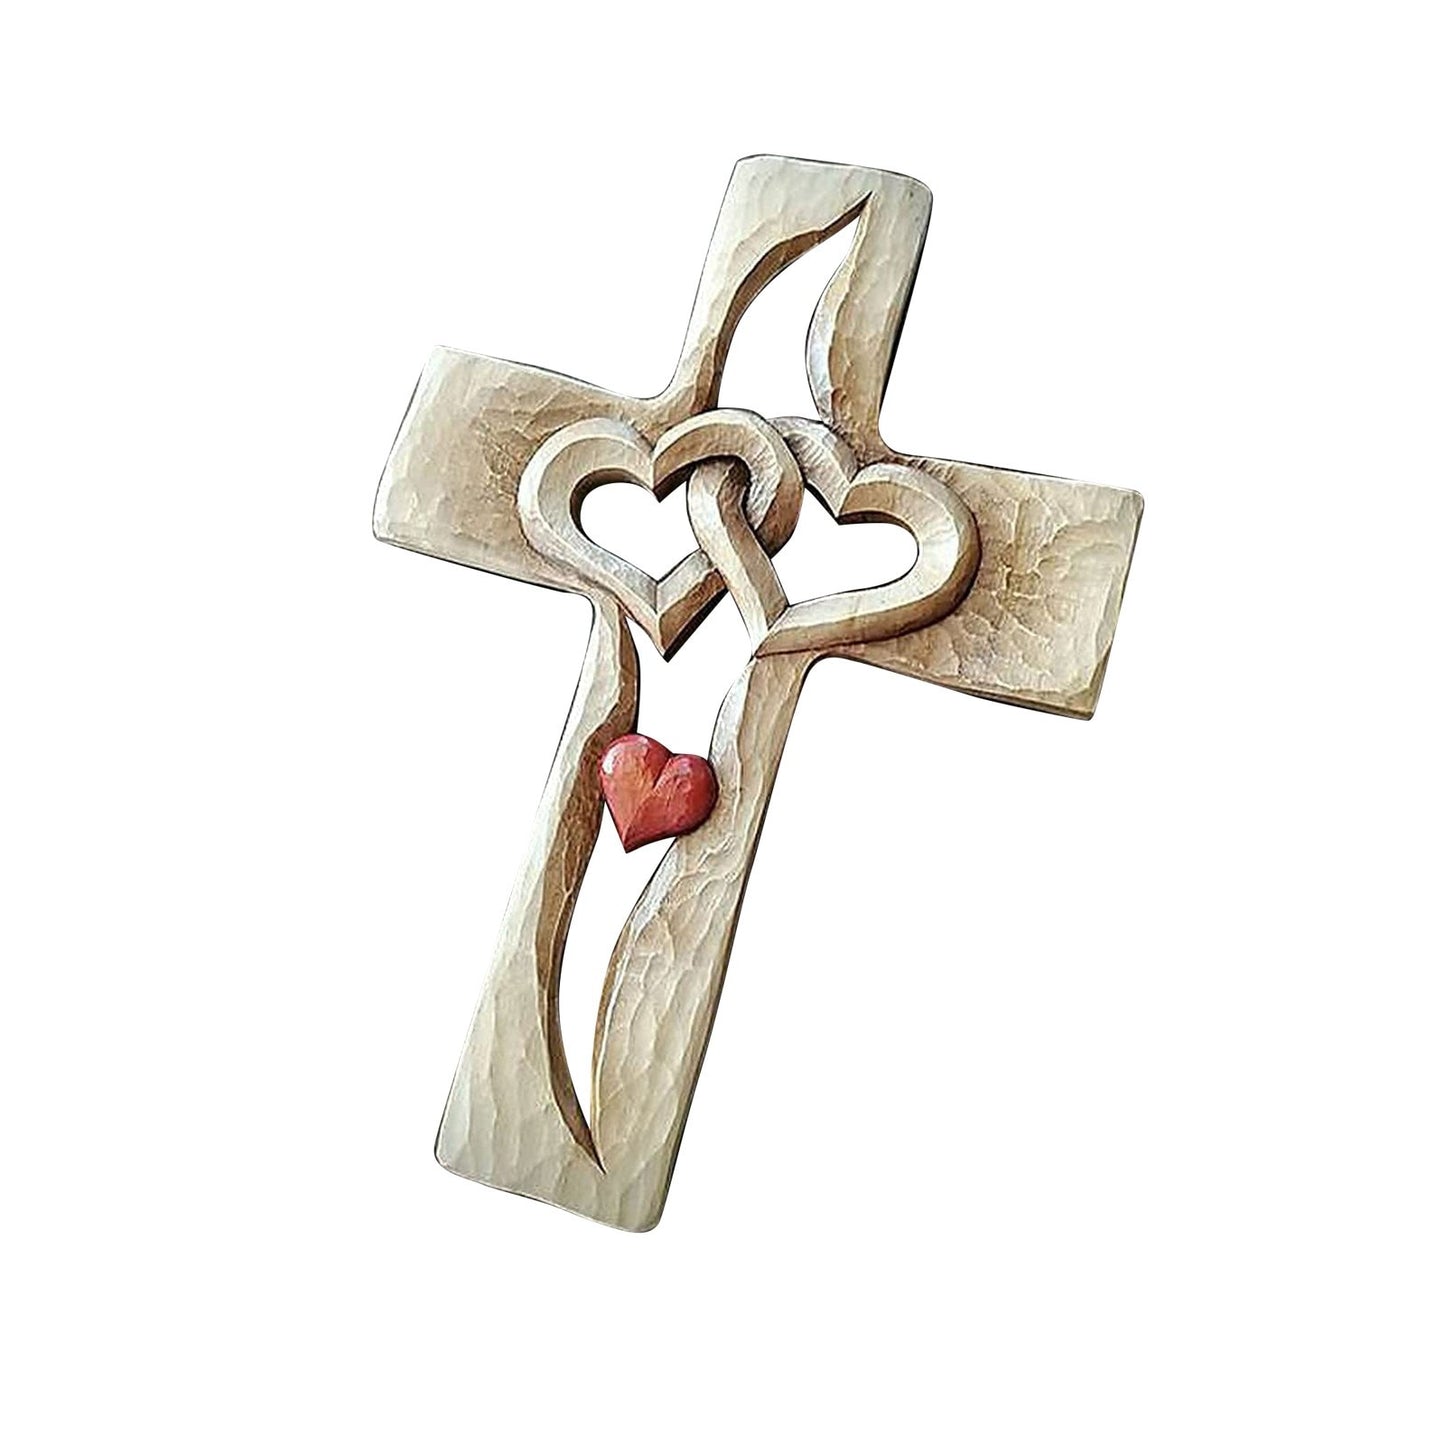 Carved Wooden Cross Intertwined Hearts Acrylic Love Cross